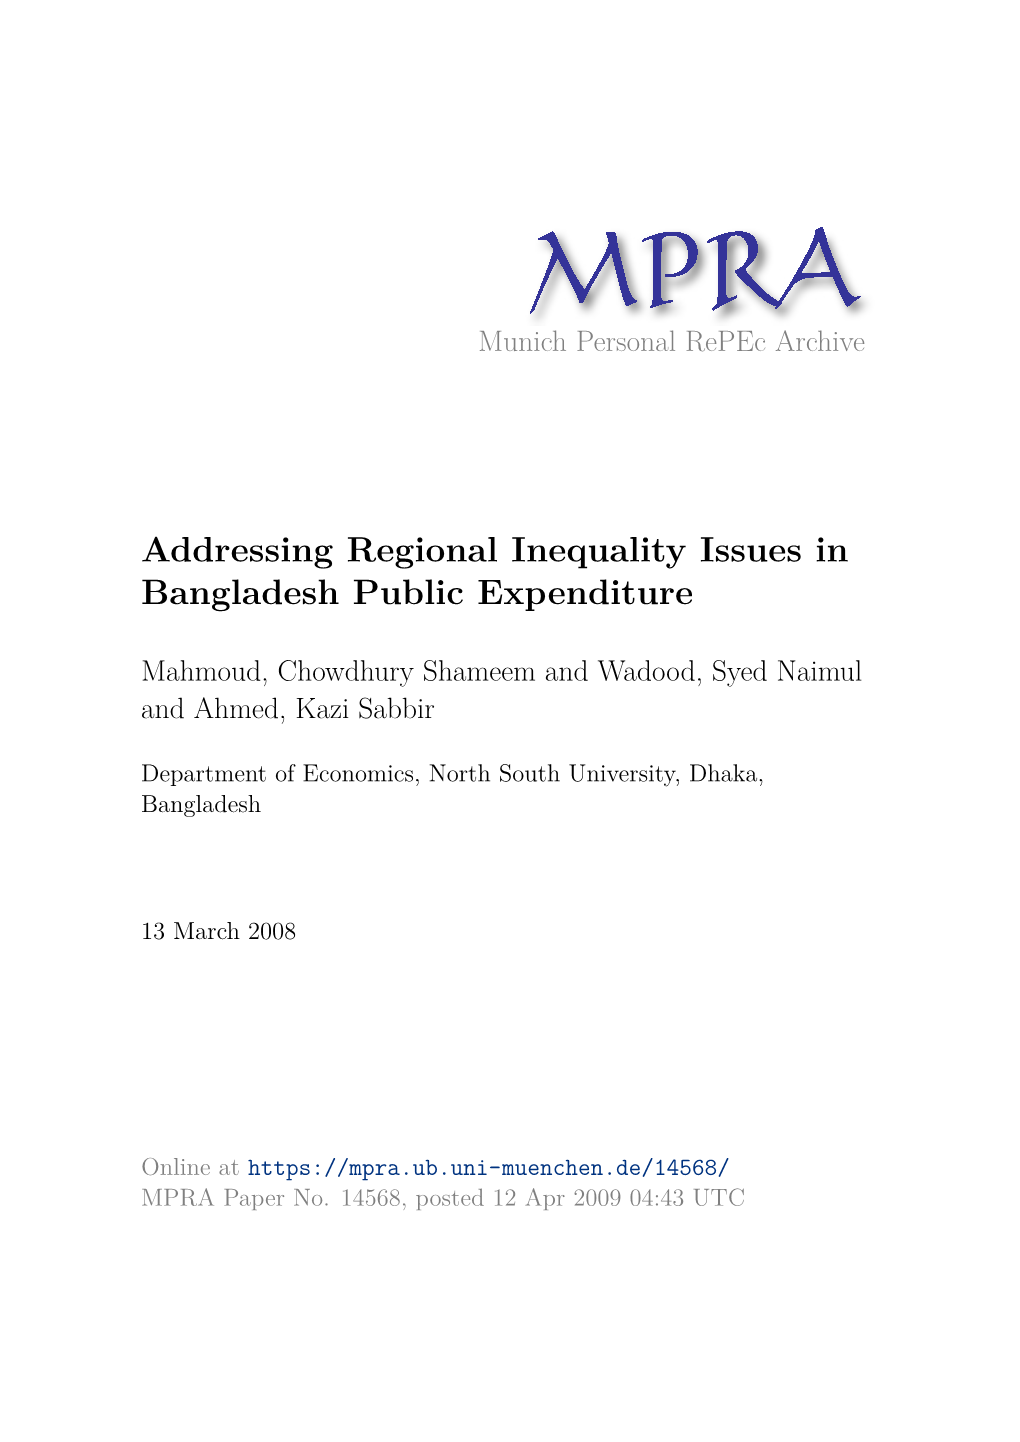 Addressing Regional Inequality Issues in Bangladesh Public Expenditure